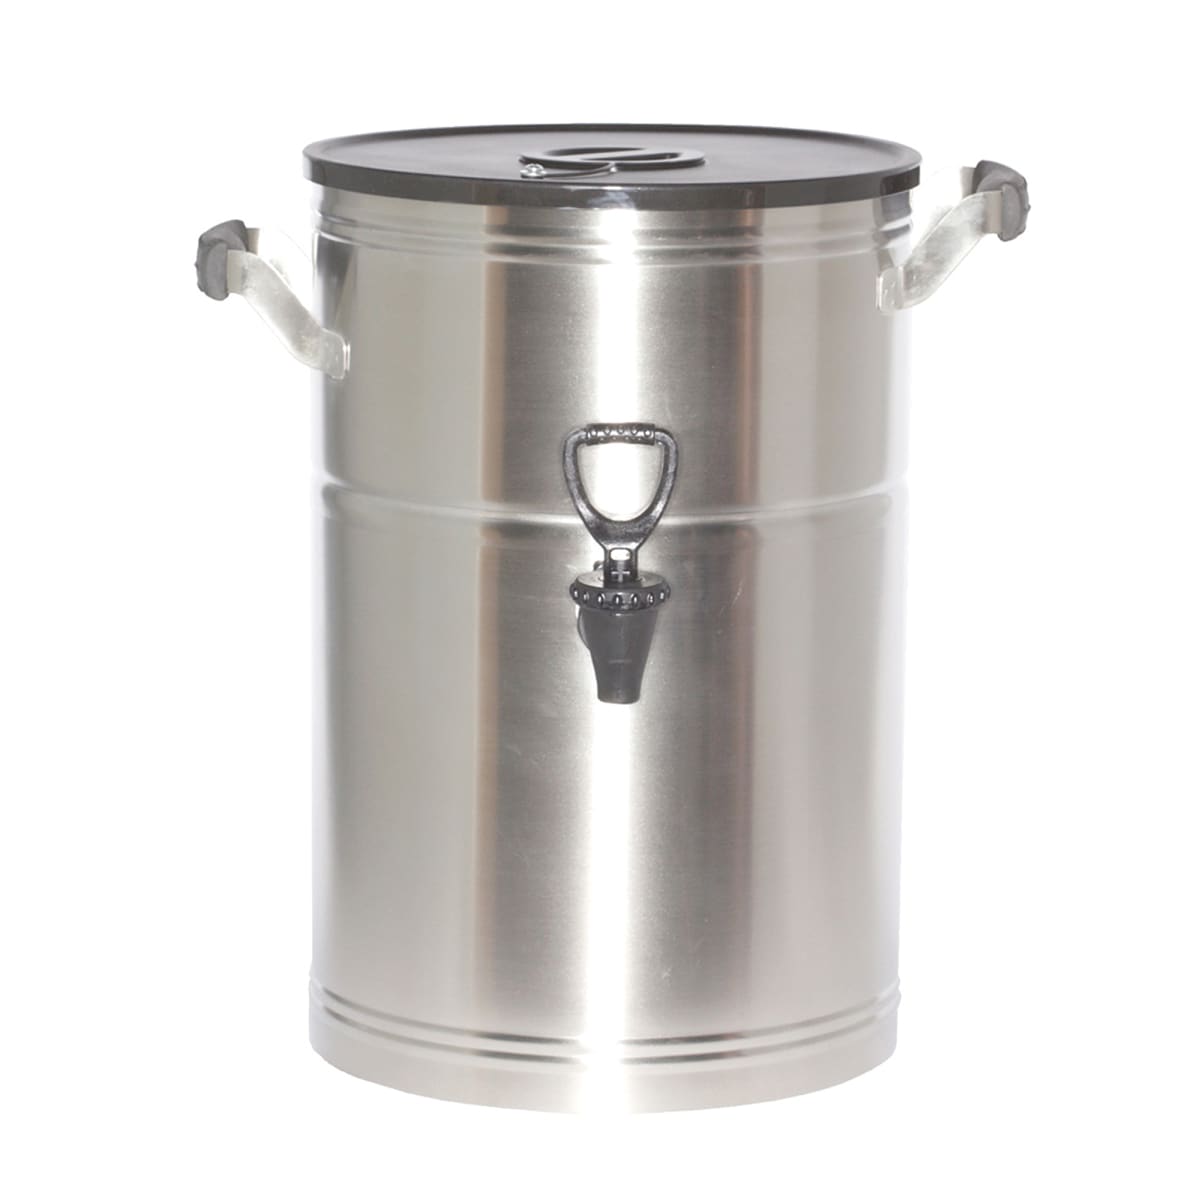 Service Ideas ITS3GPL Round Tea Urn, 3 Gallon, Stainless Steel, Brushed  Finish